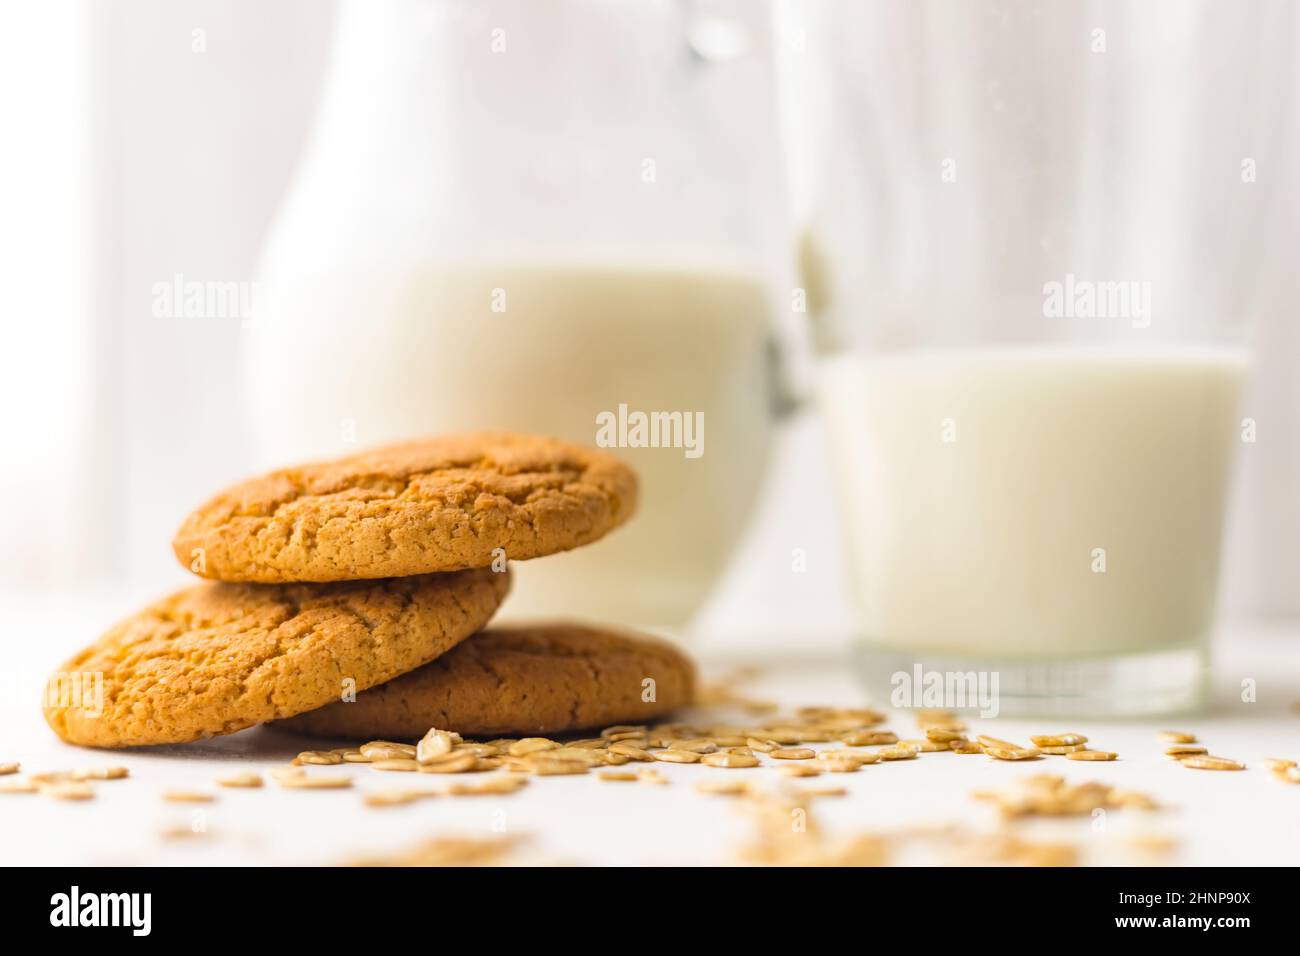 Pile oatmeal cookies and oat cereal flakes on white table on milk glass jug background Stock Photo